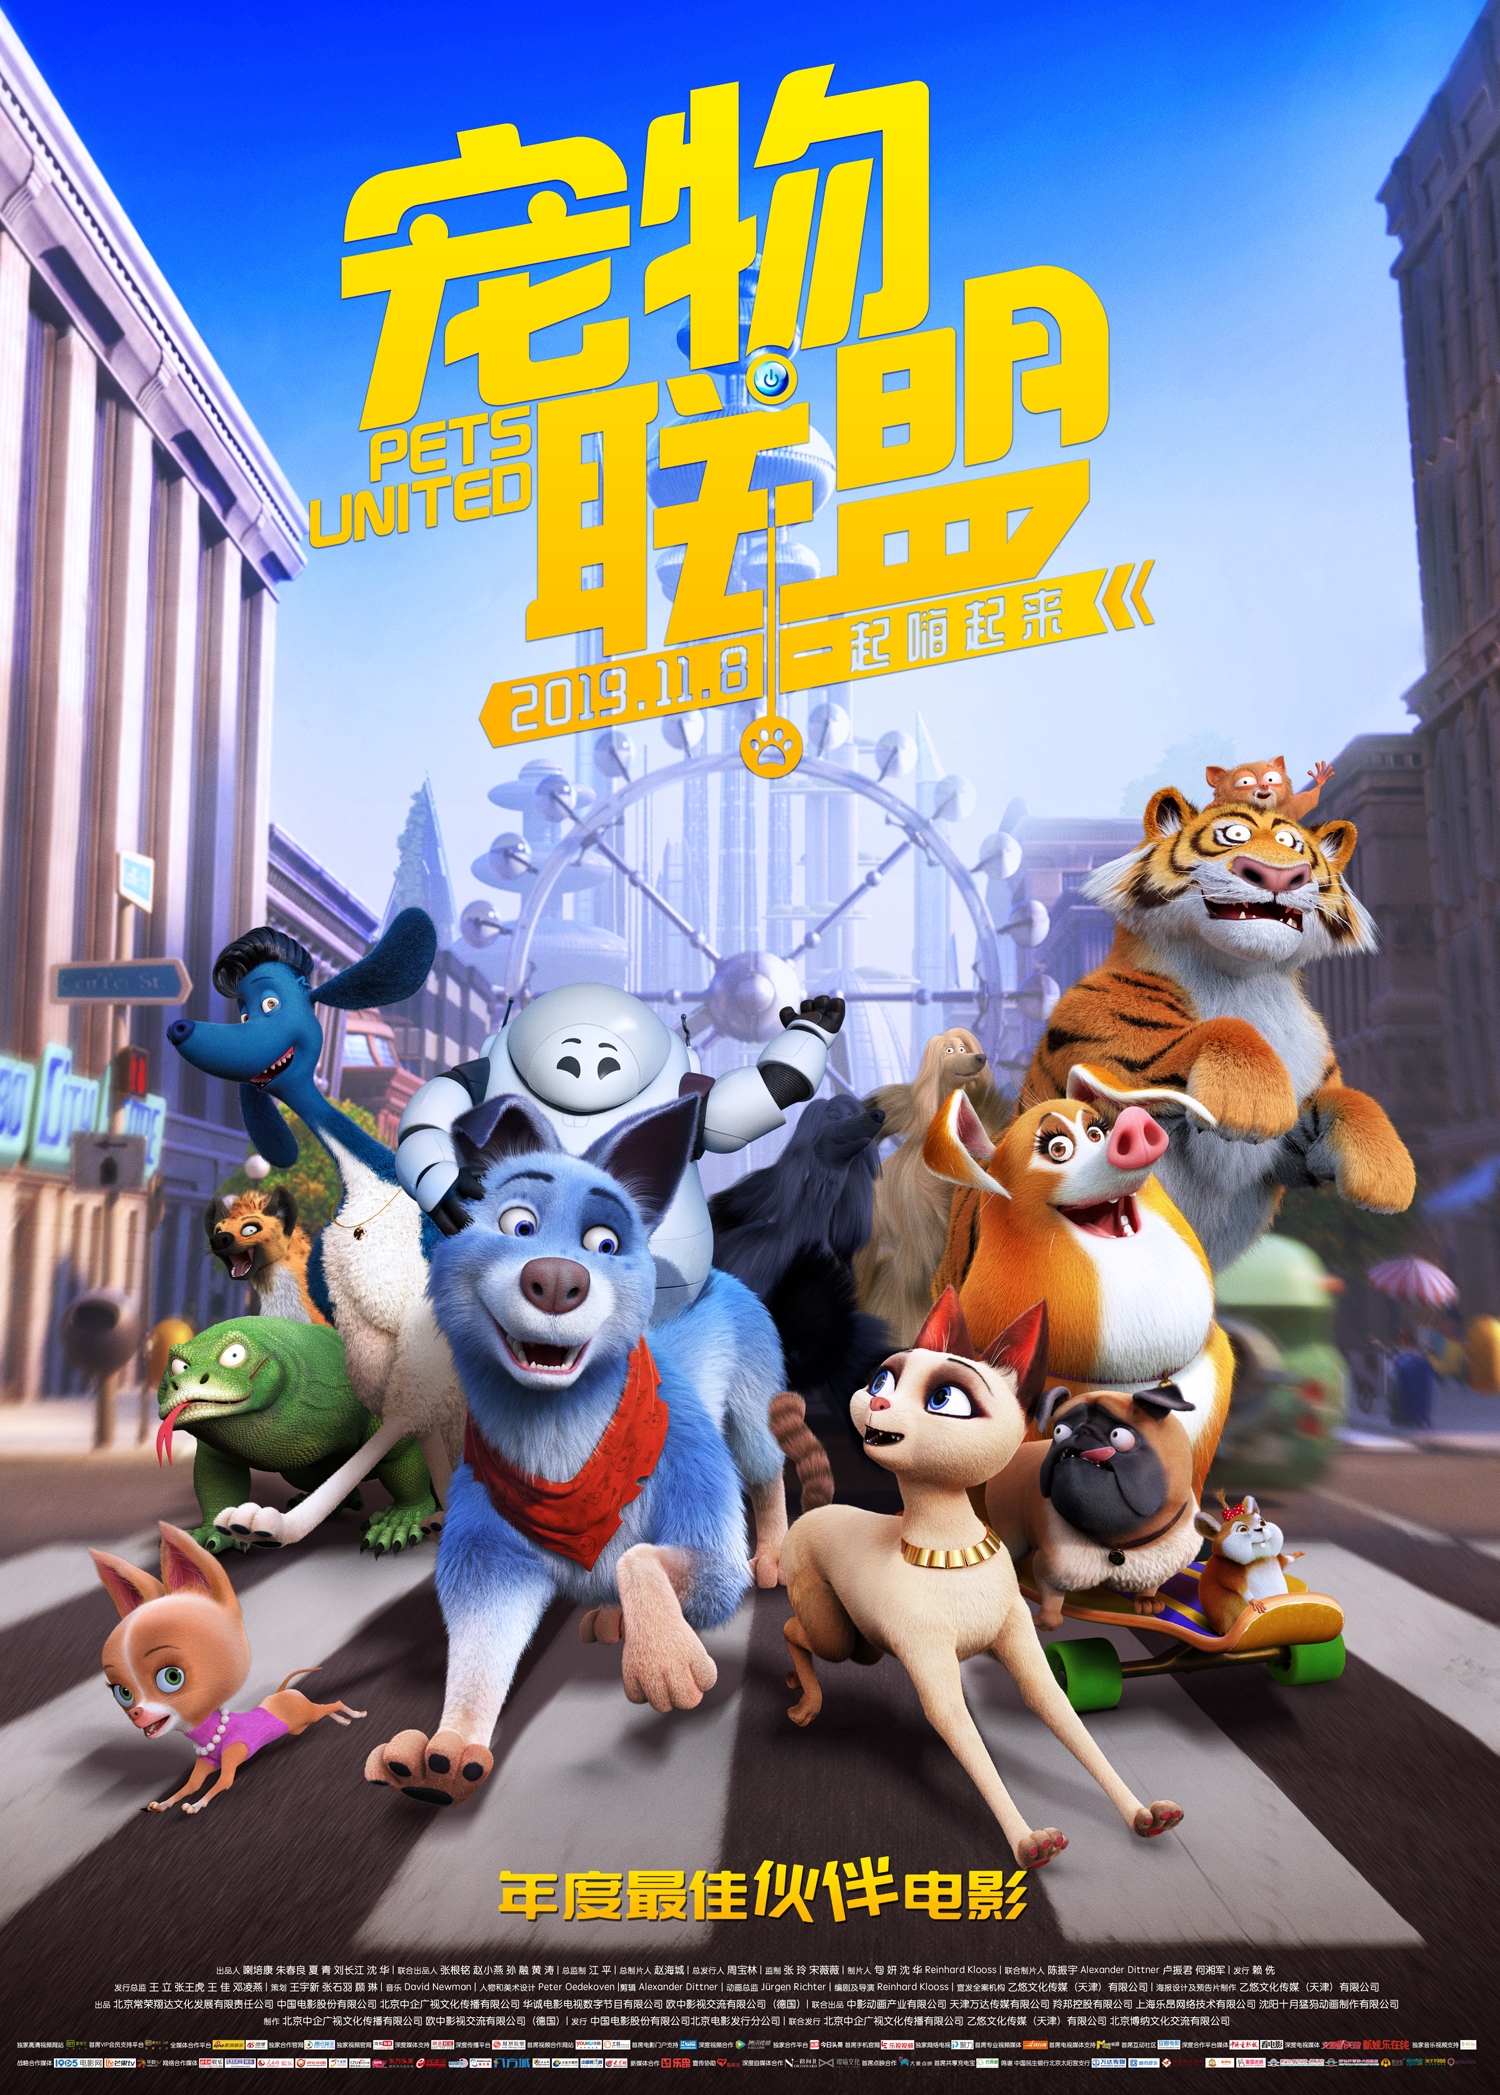 Pets United Poster 12: Full Size Poster Image